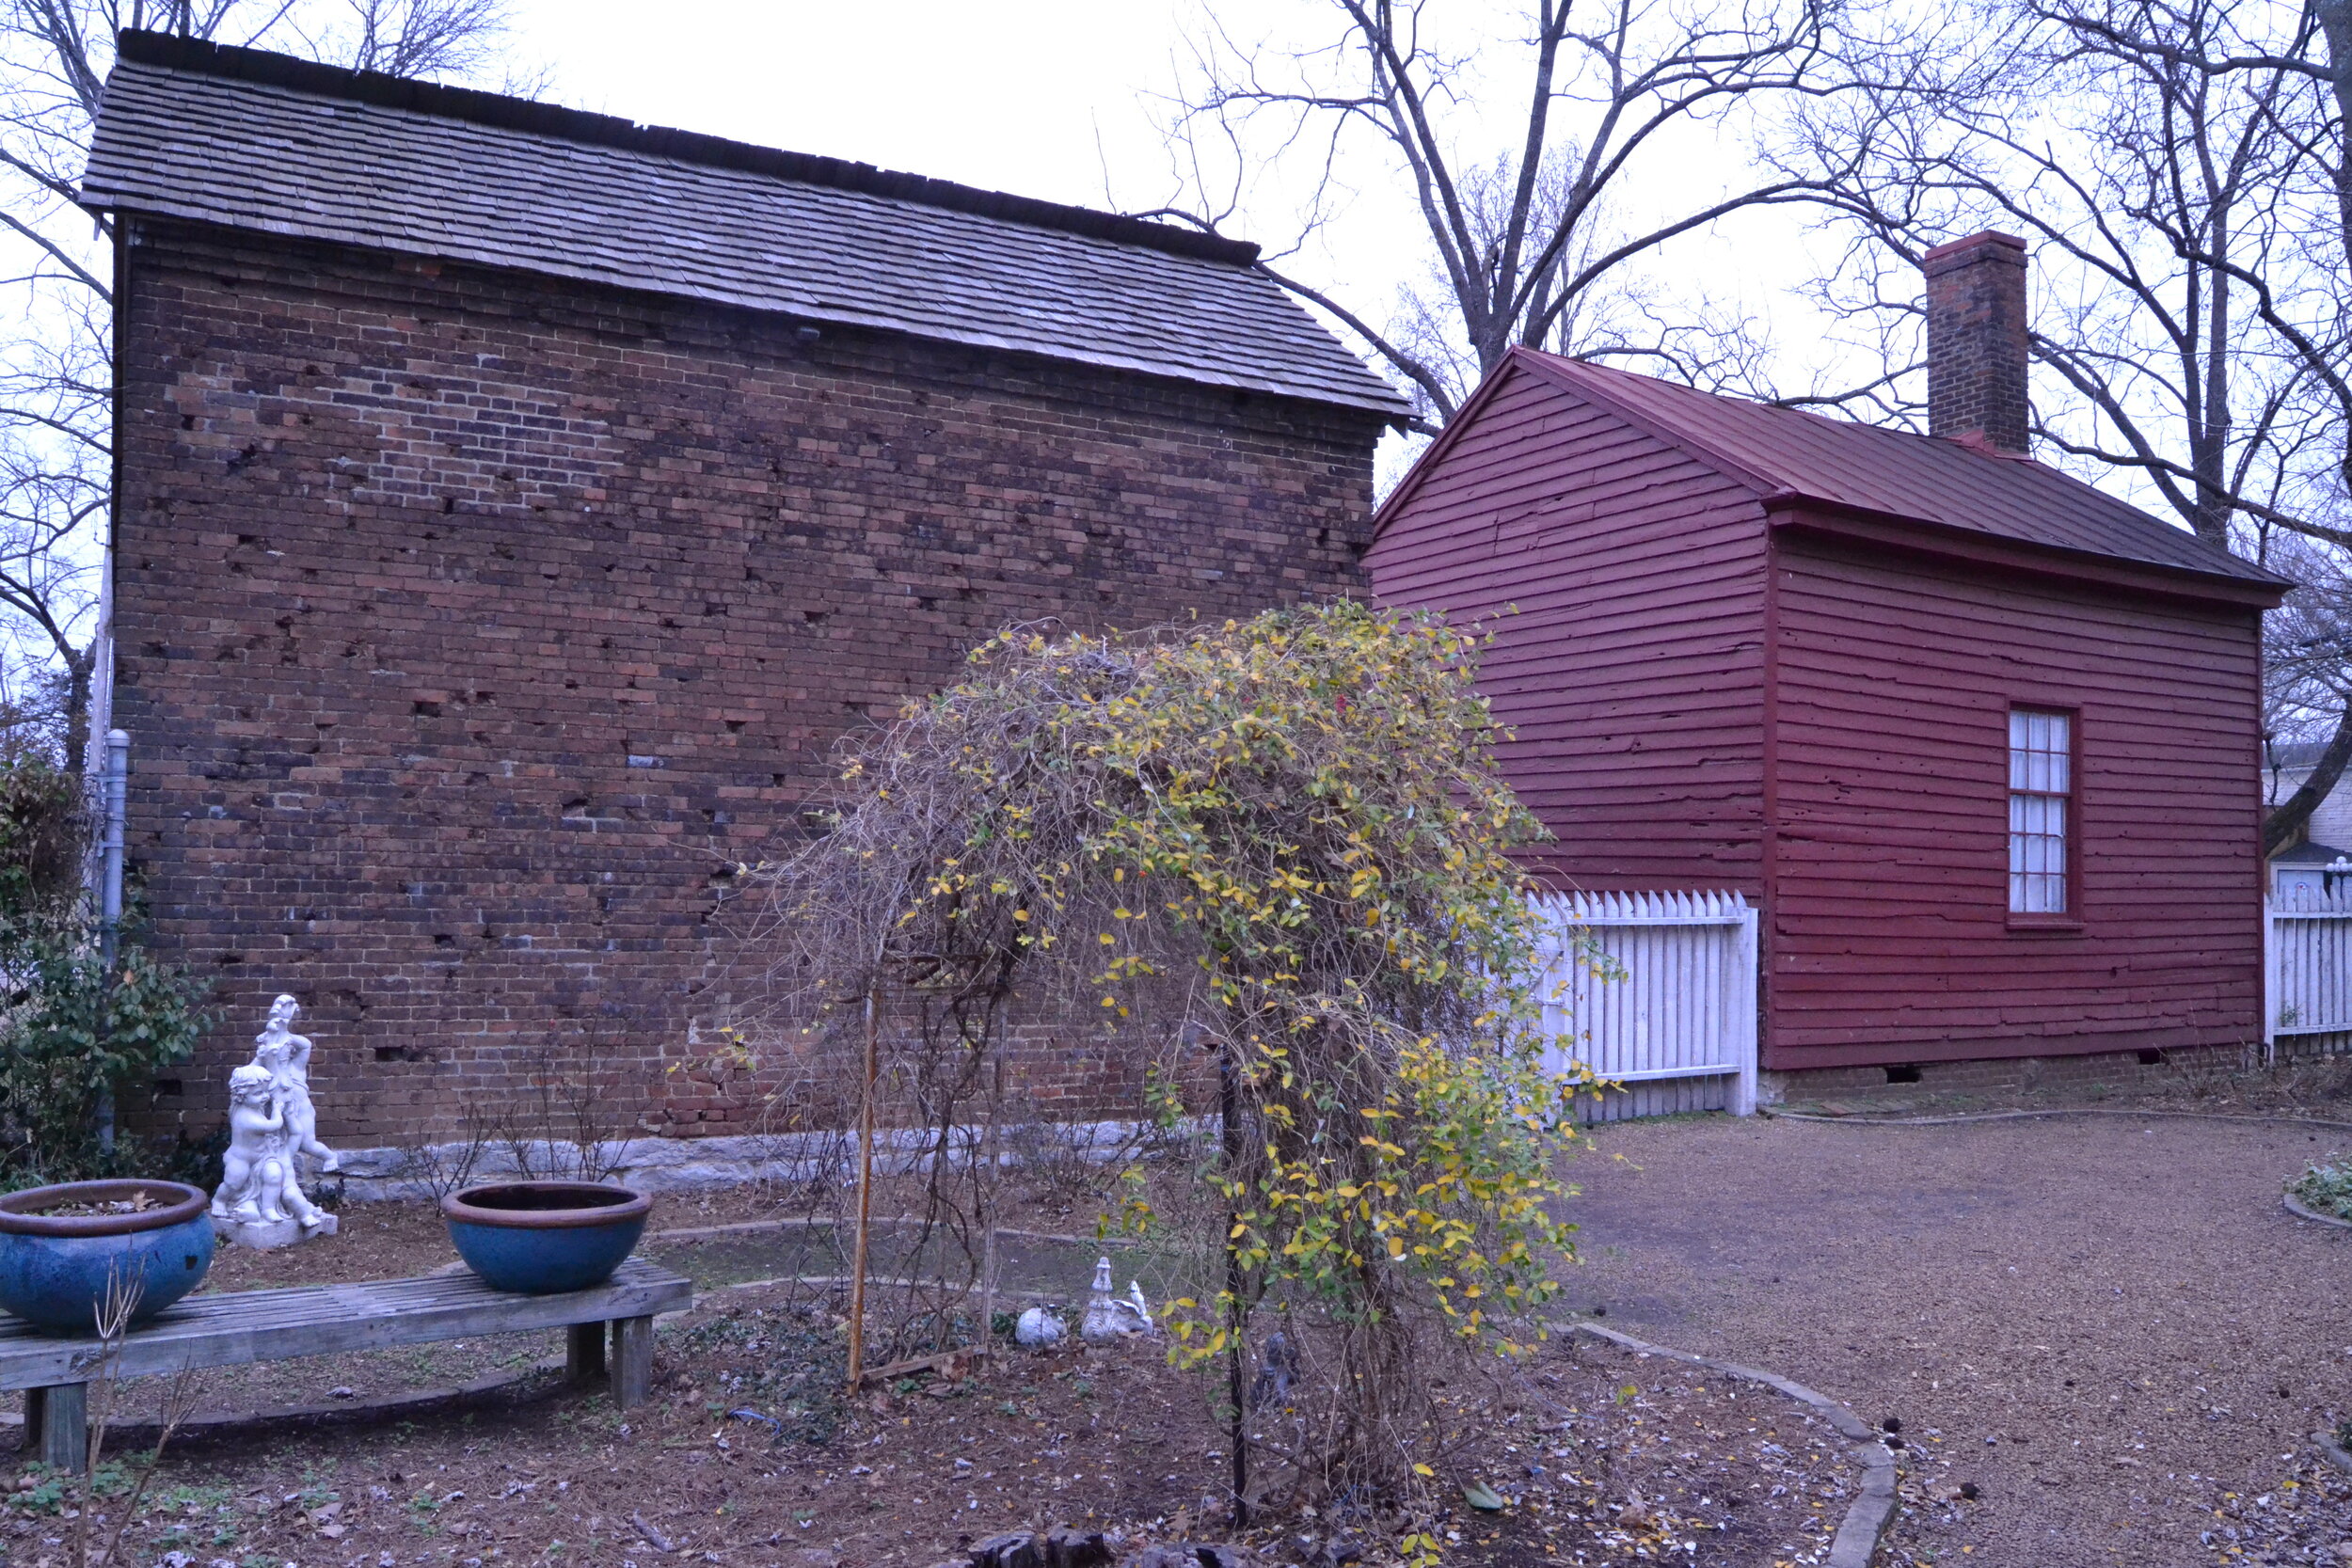 Outbuildings before land reclamation and restoration efforts, 2014